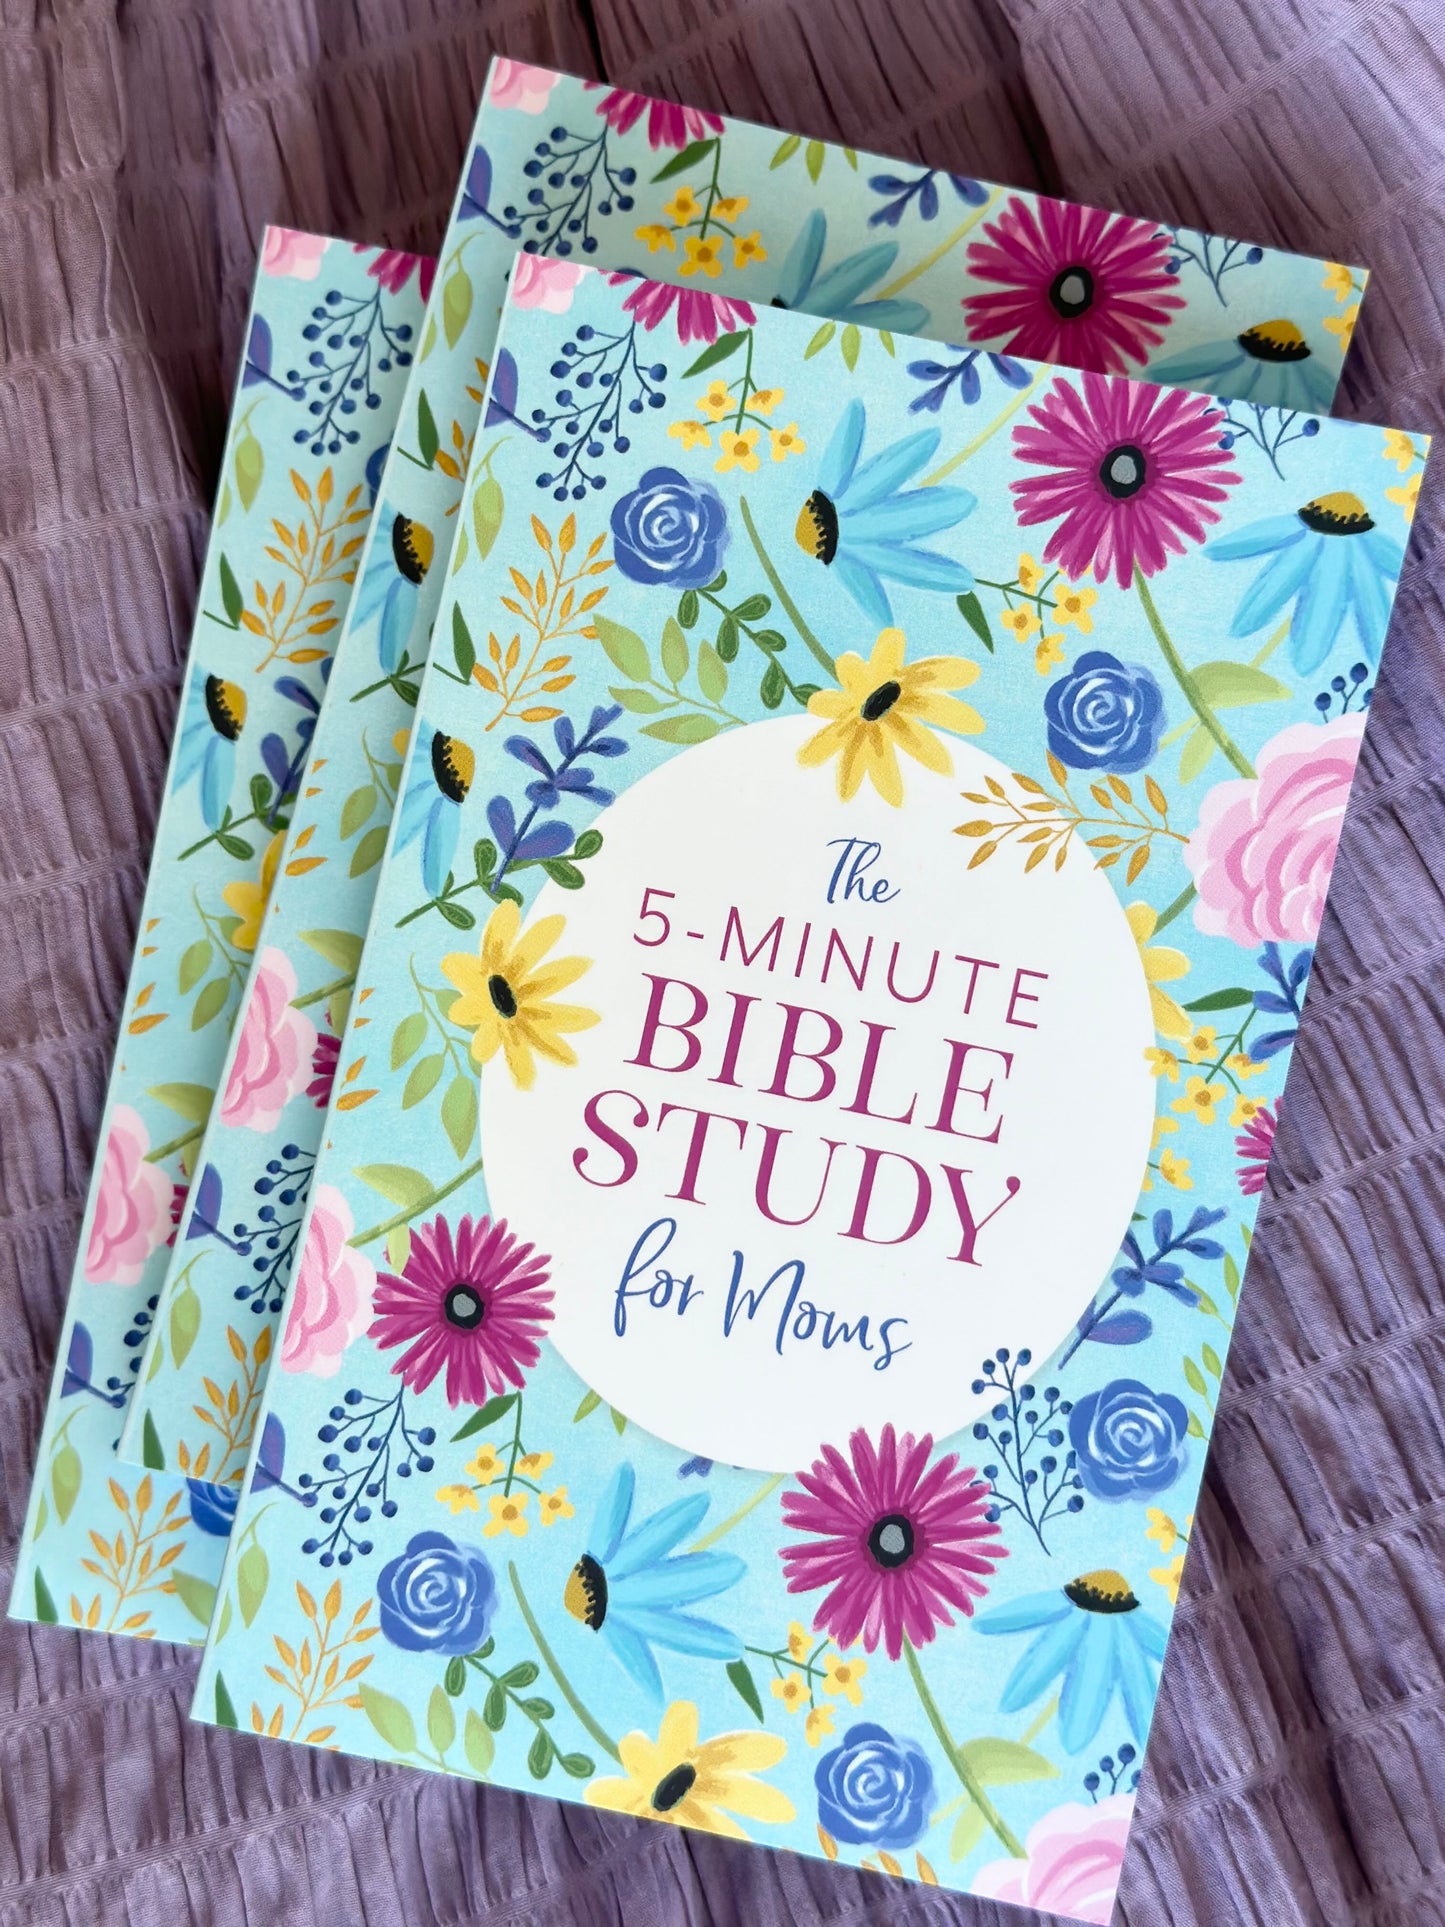 The 5-minute bible study for Moms